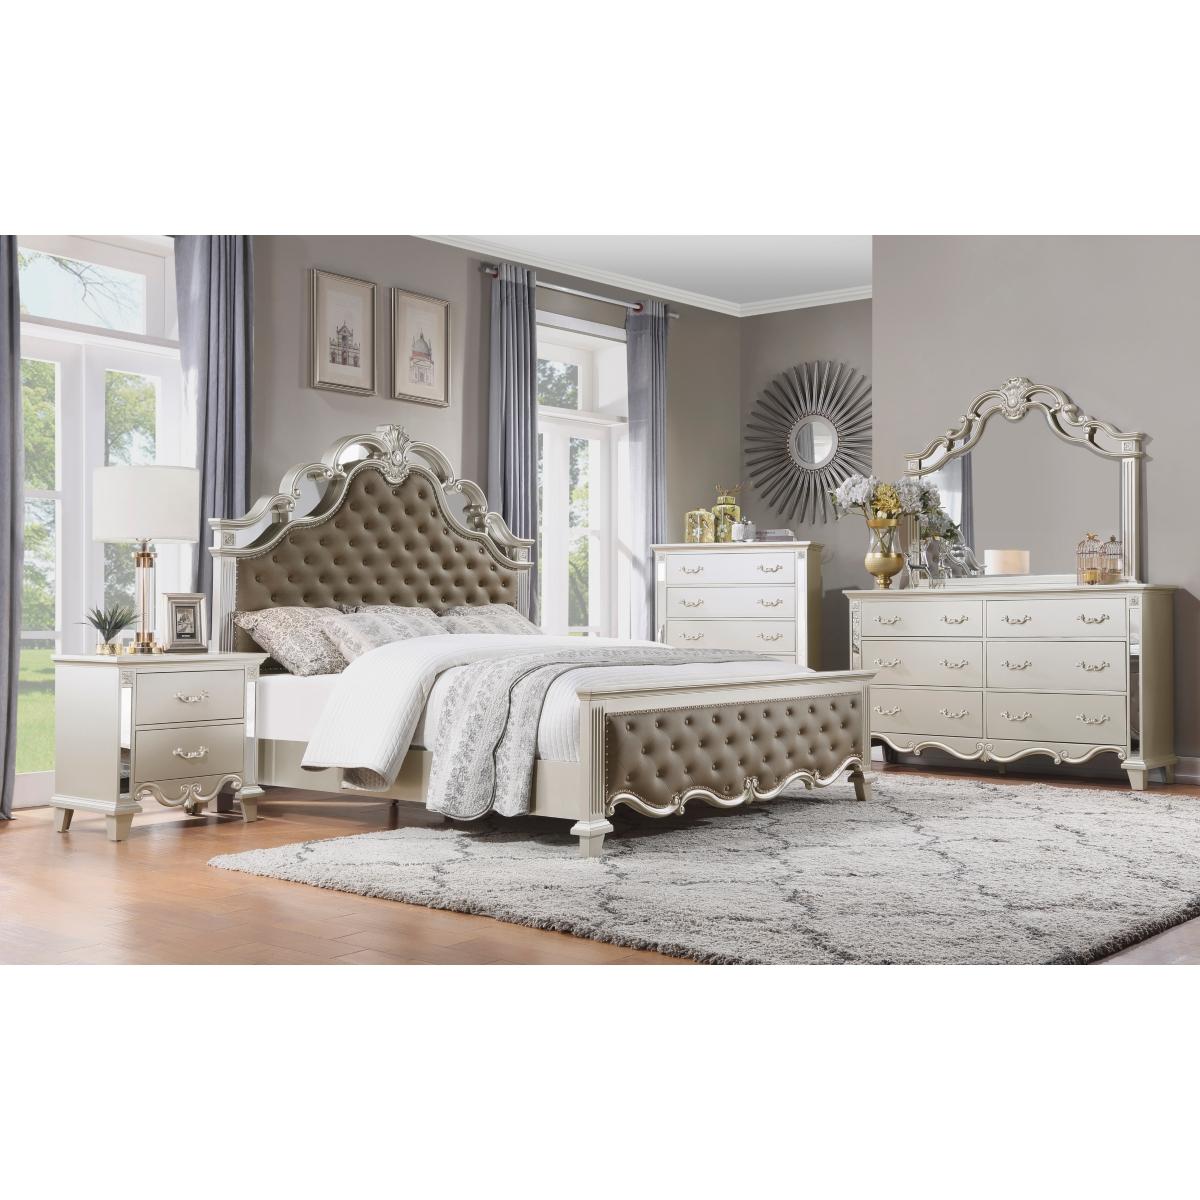 Traditional Bedroom Set 1429-1*5PC Ever 1429-1*5PC in Champagne Faux Leather